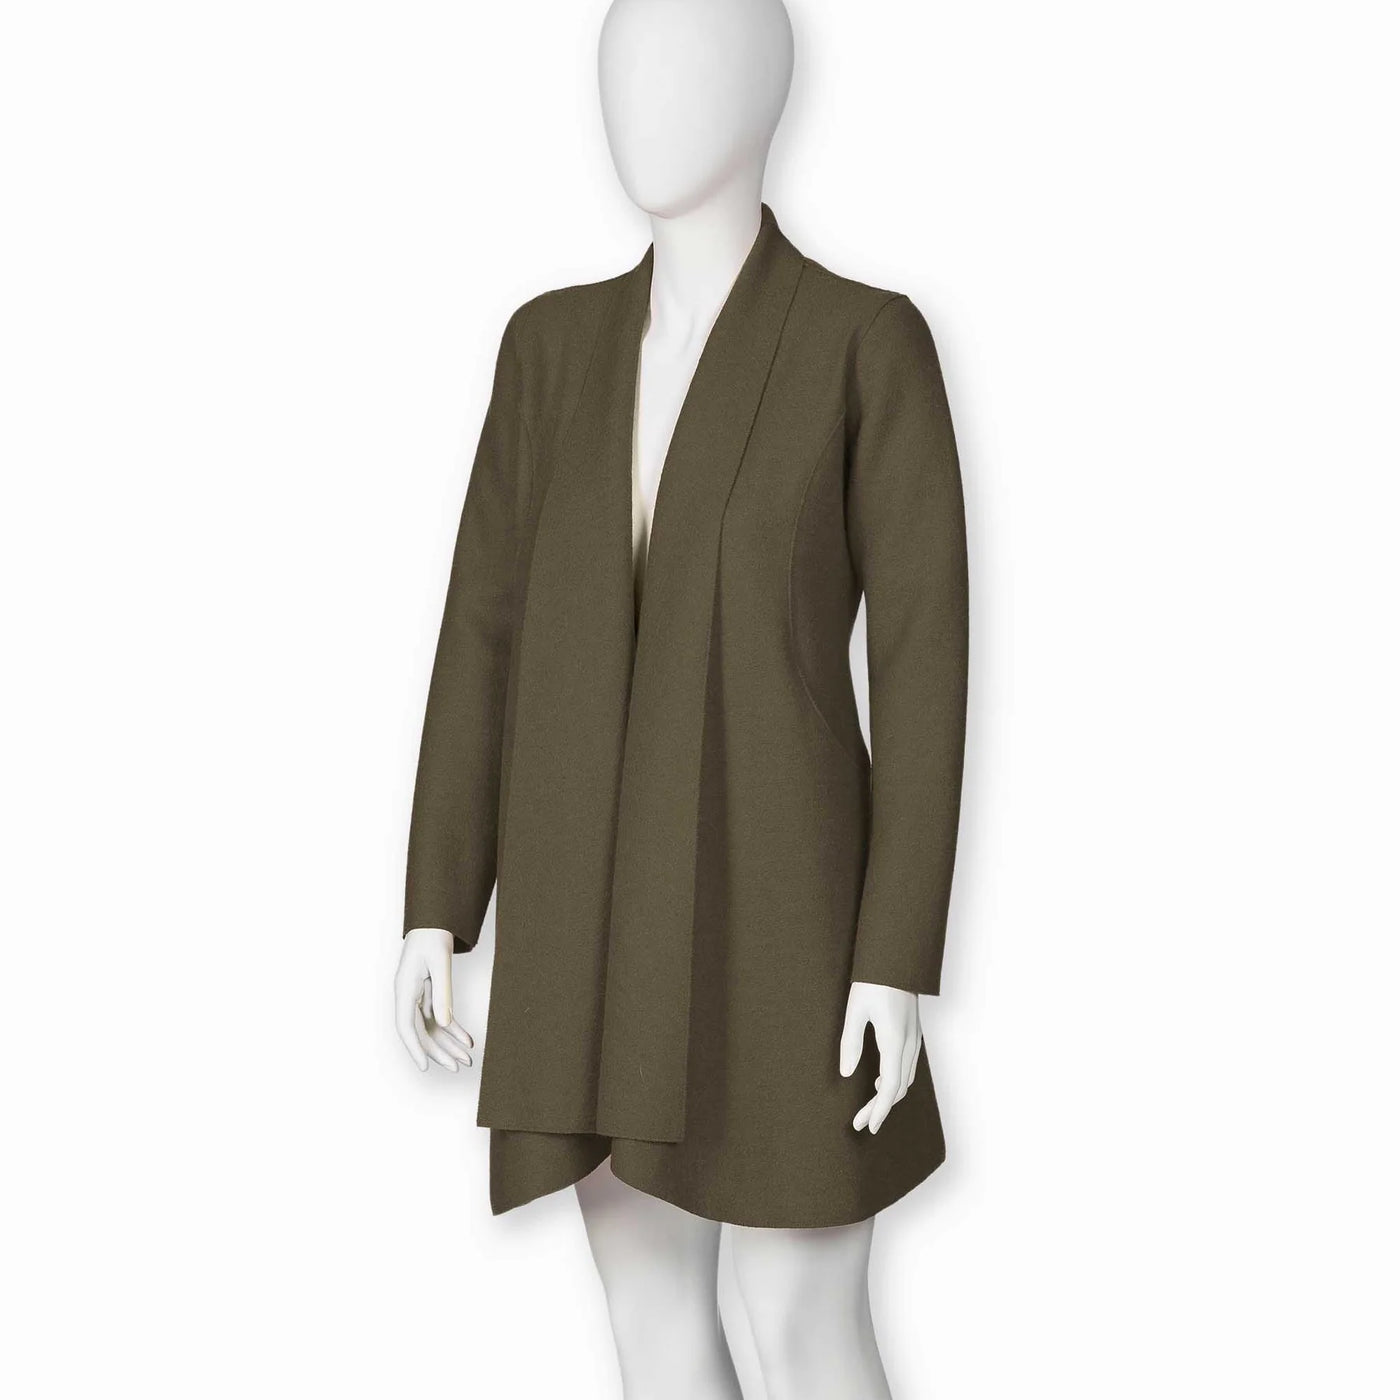 ALICIA ADAMS SWING COAT (Available in 4 Sizes and 15 Colors)